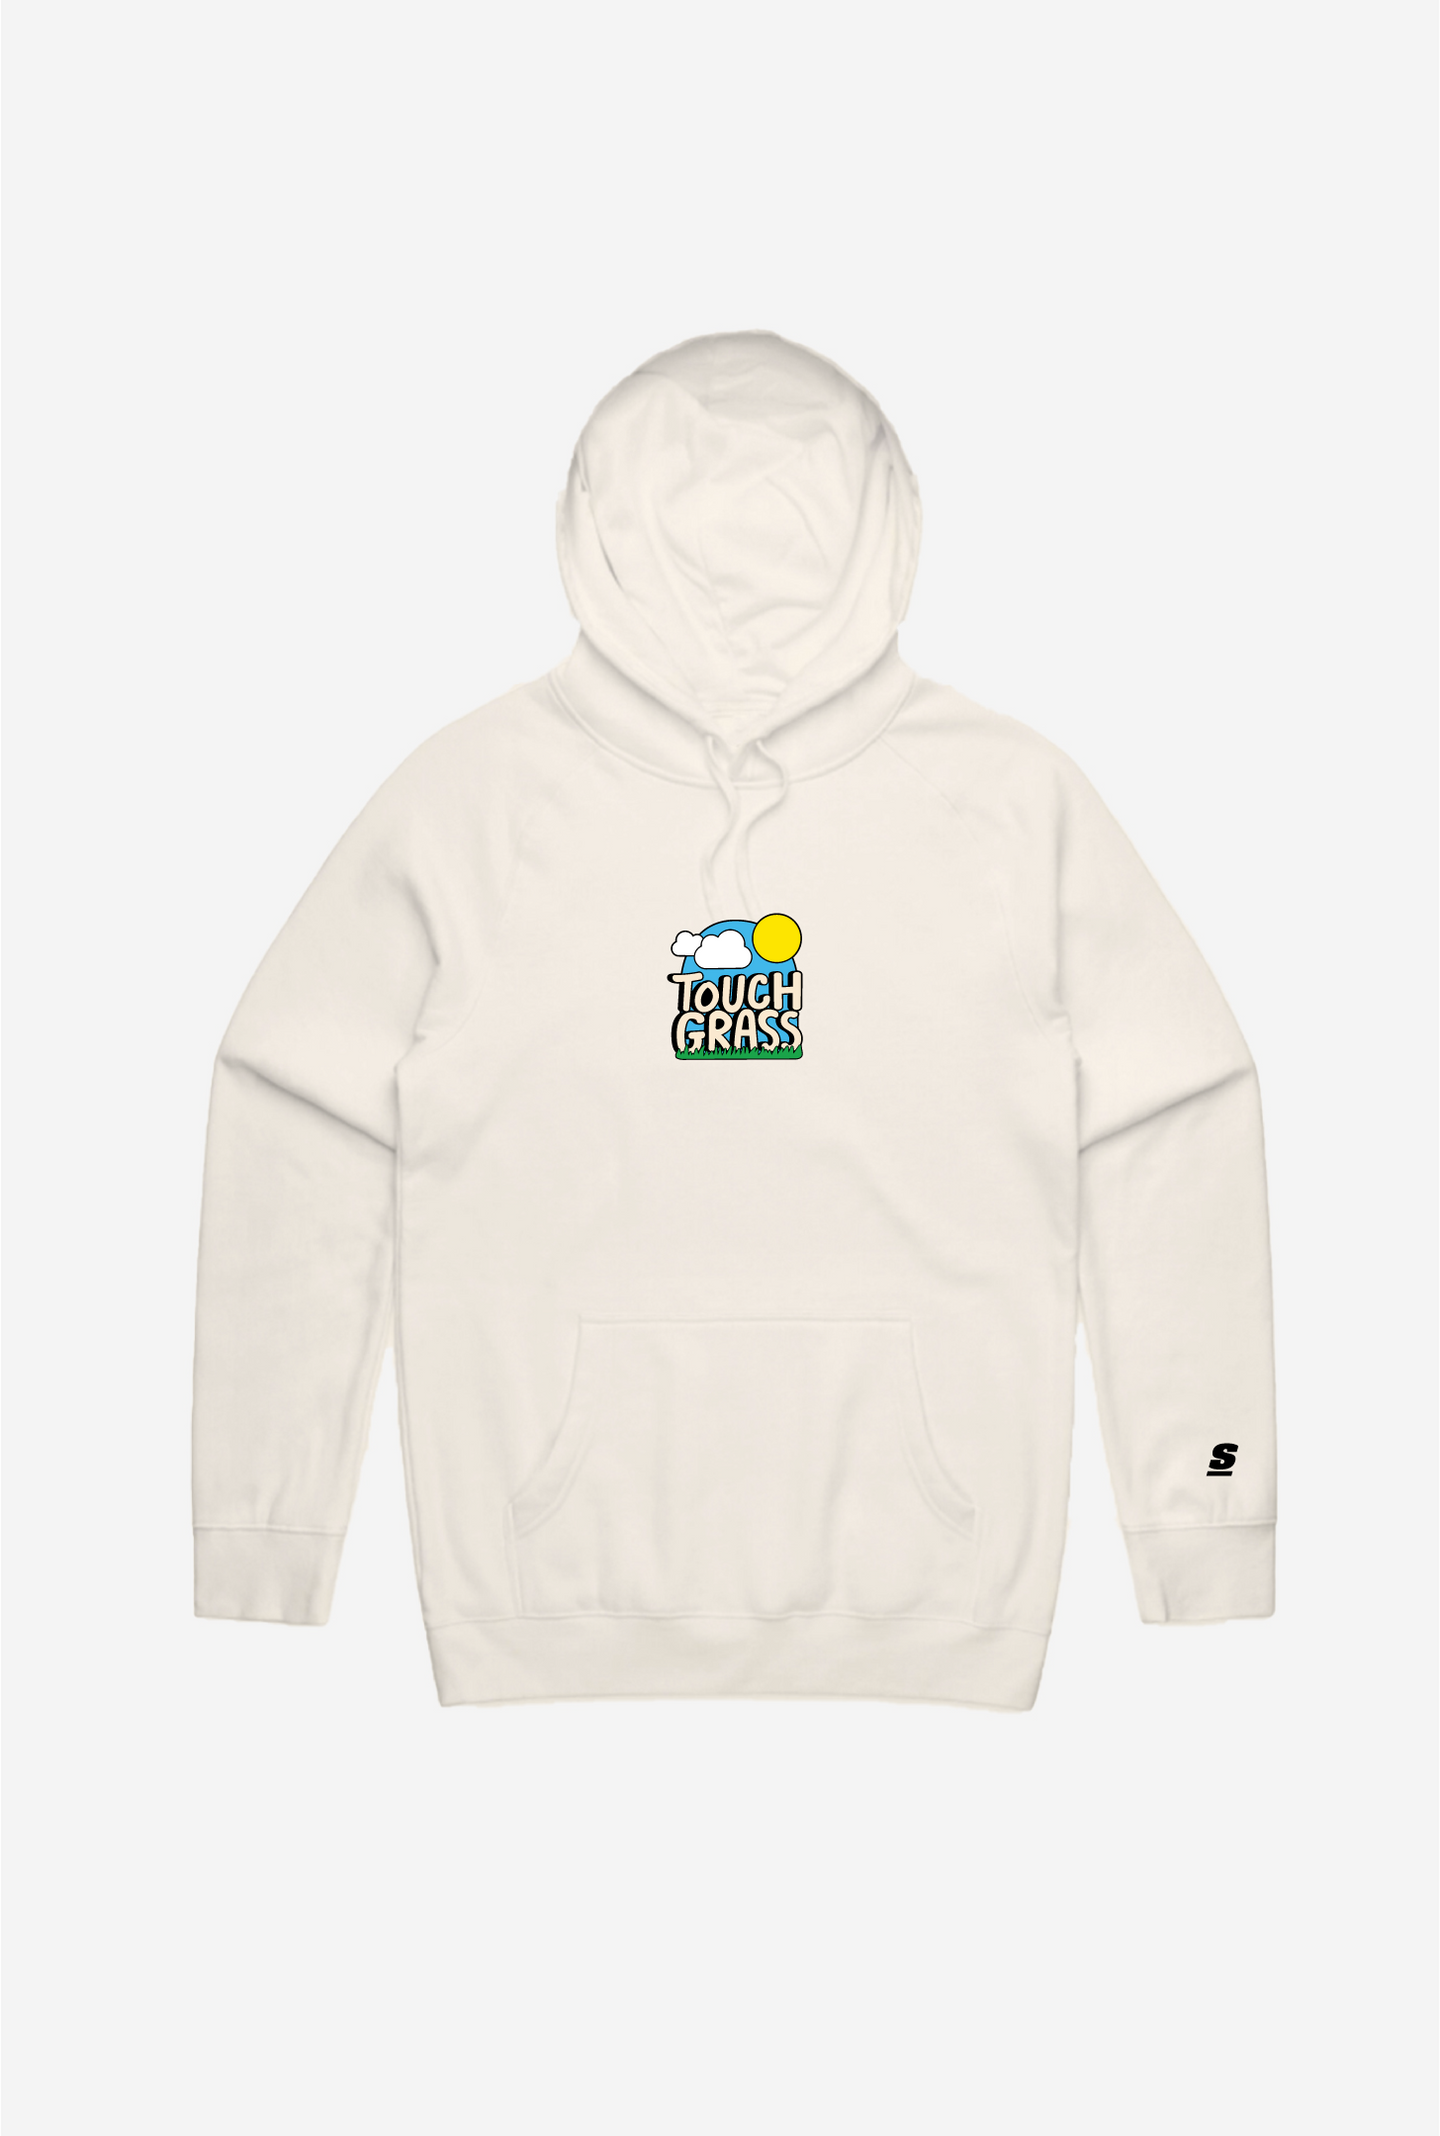 theScore Touch Grass Hoodie - Ivory